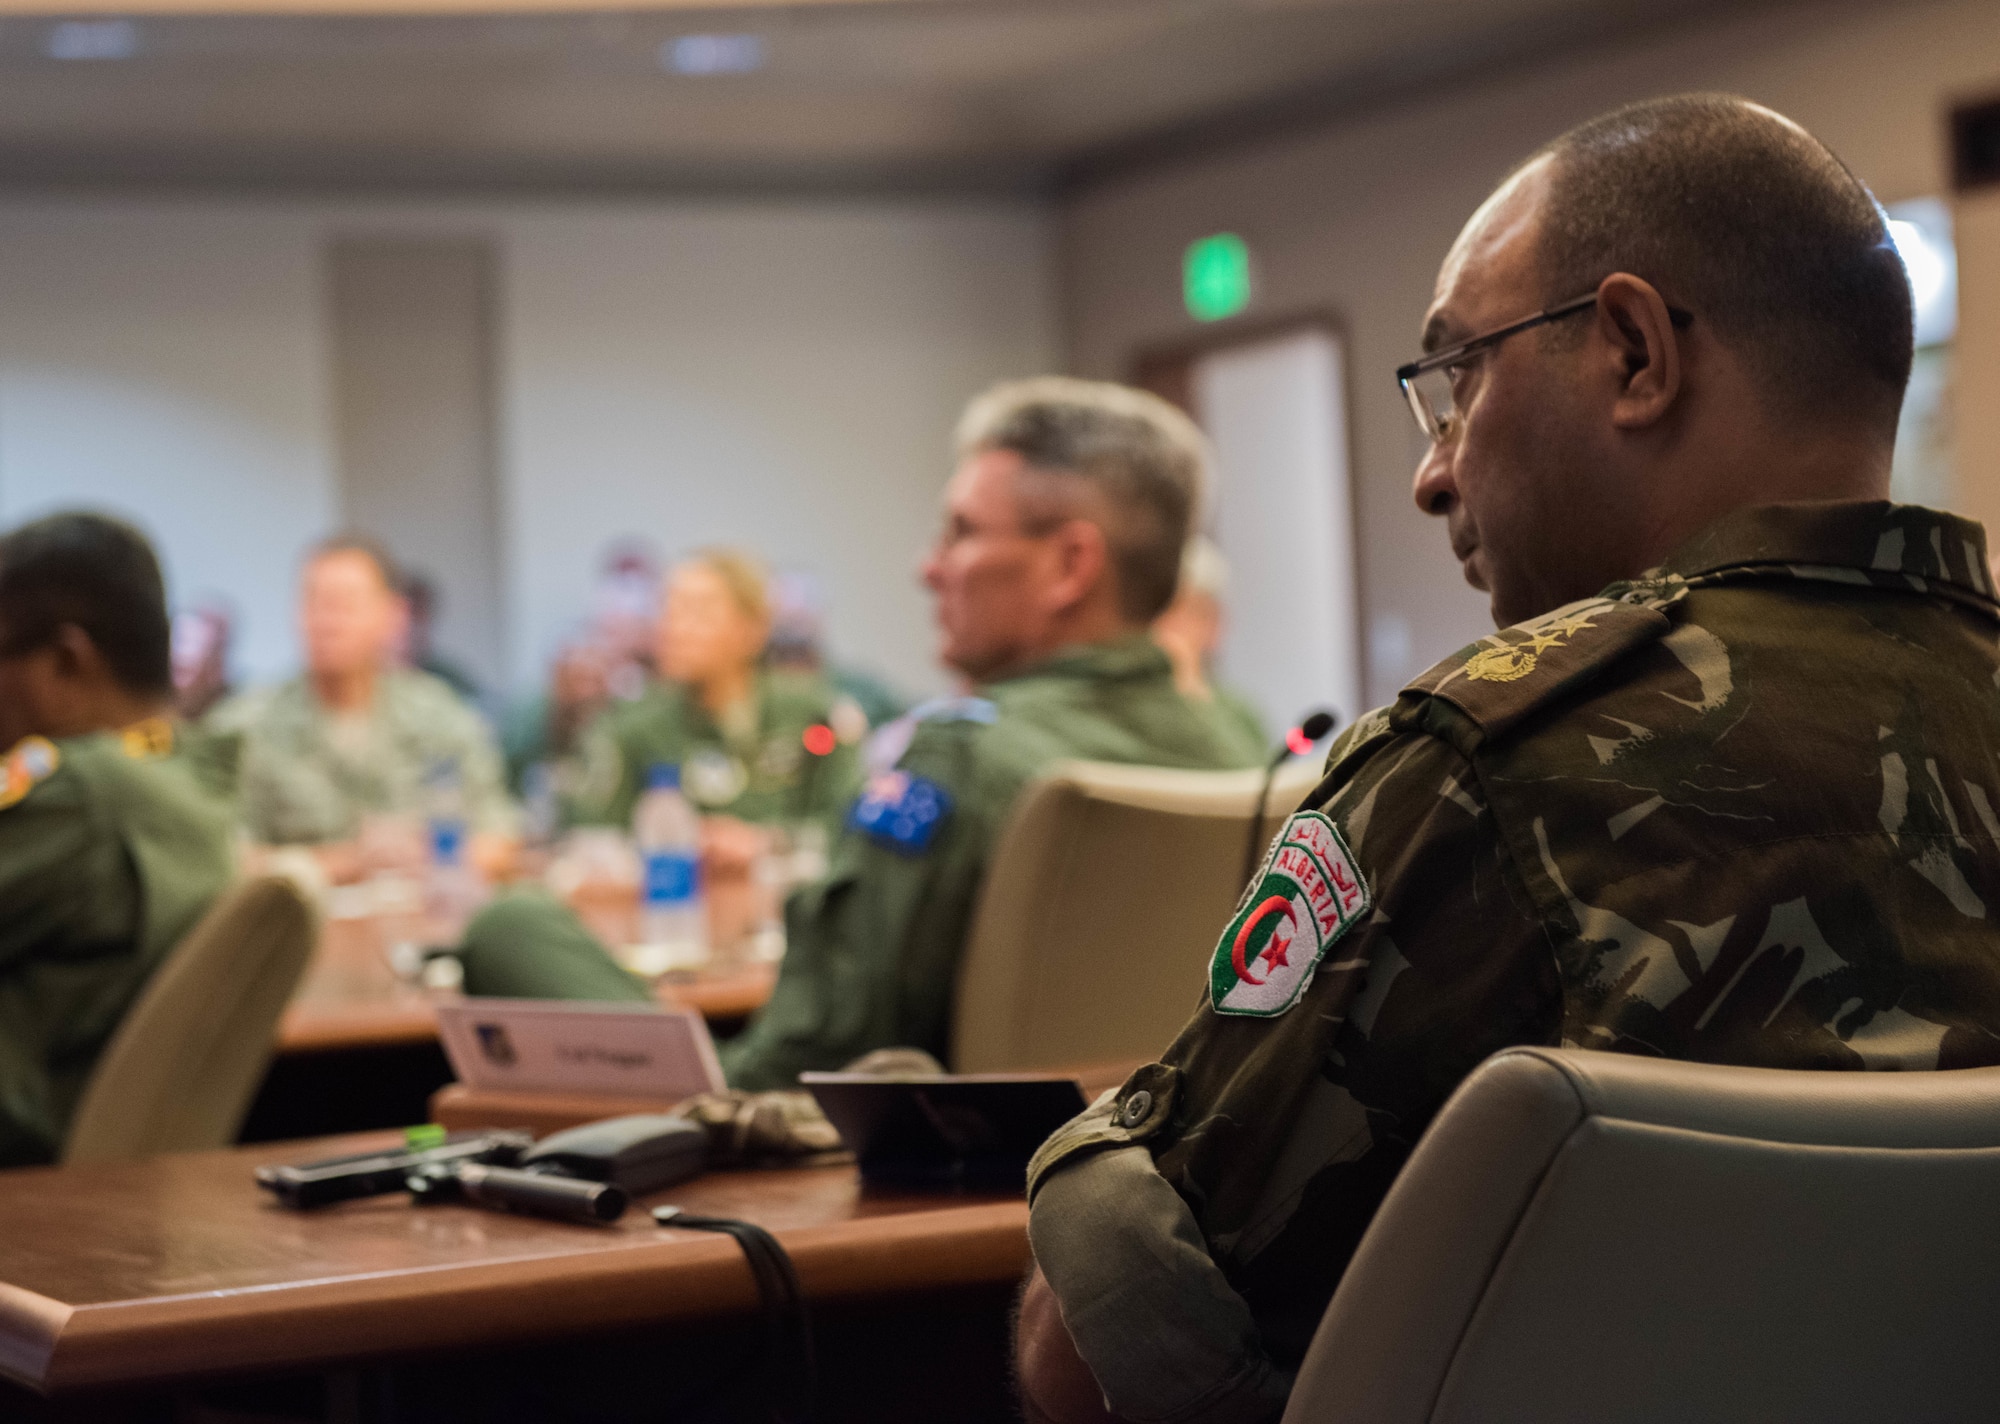 Algerian air force Col. Hadj Neggaz listens to a briefing in the Kenney Conference Room at Headquarters Pacific Air Forces (PACAF) during a foreign attaché tour of Joint Base Pearl Harbor-Hickam, Hawaii, Oct. 23, 2018.